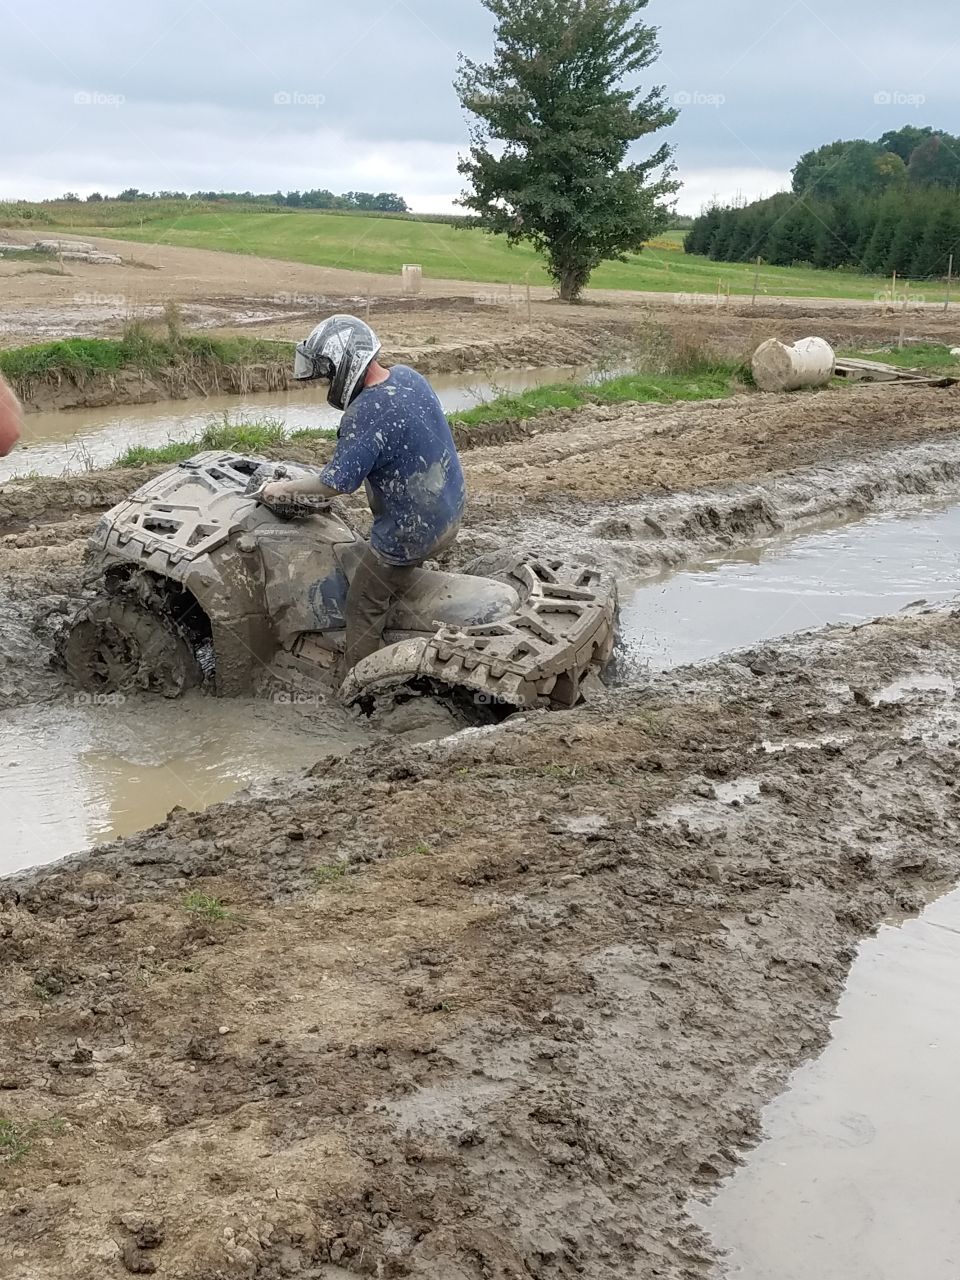 can I get out of this mud hole?